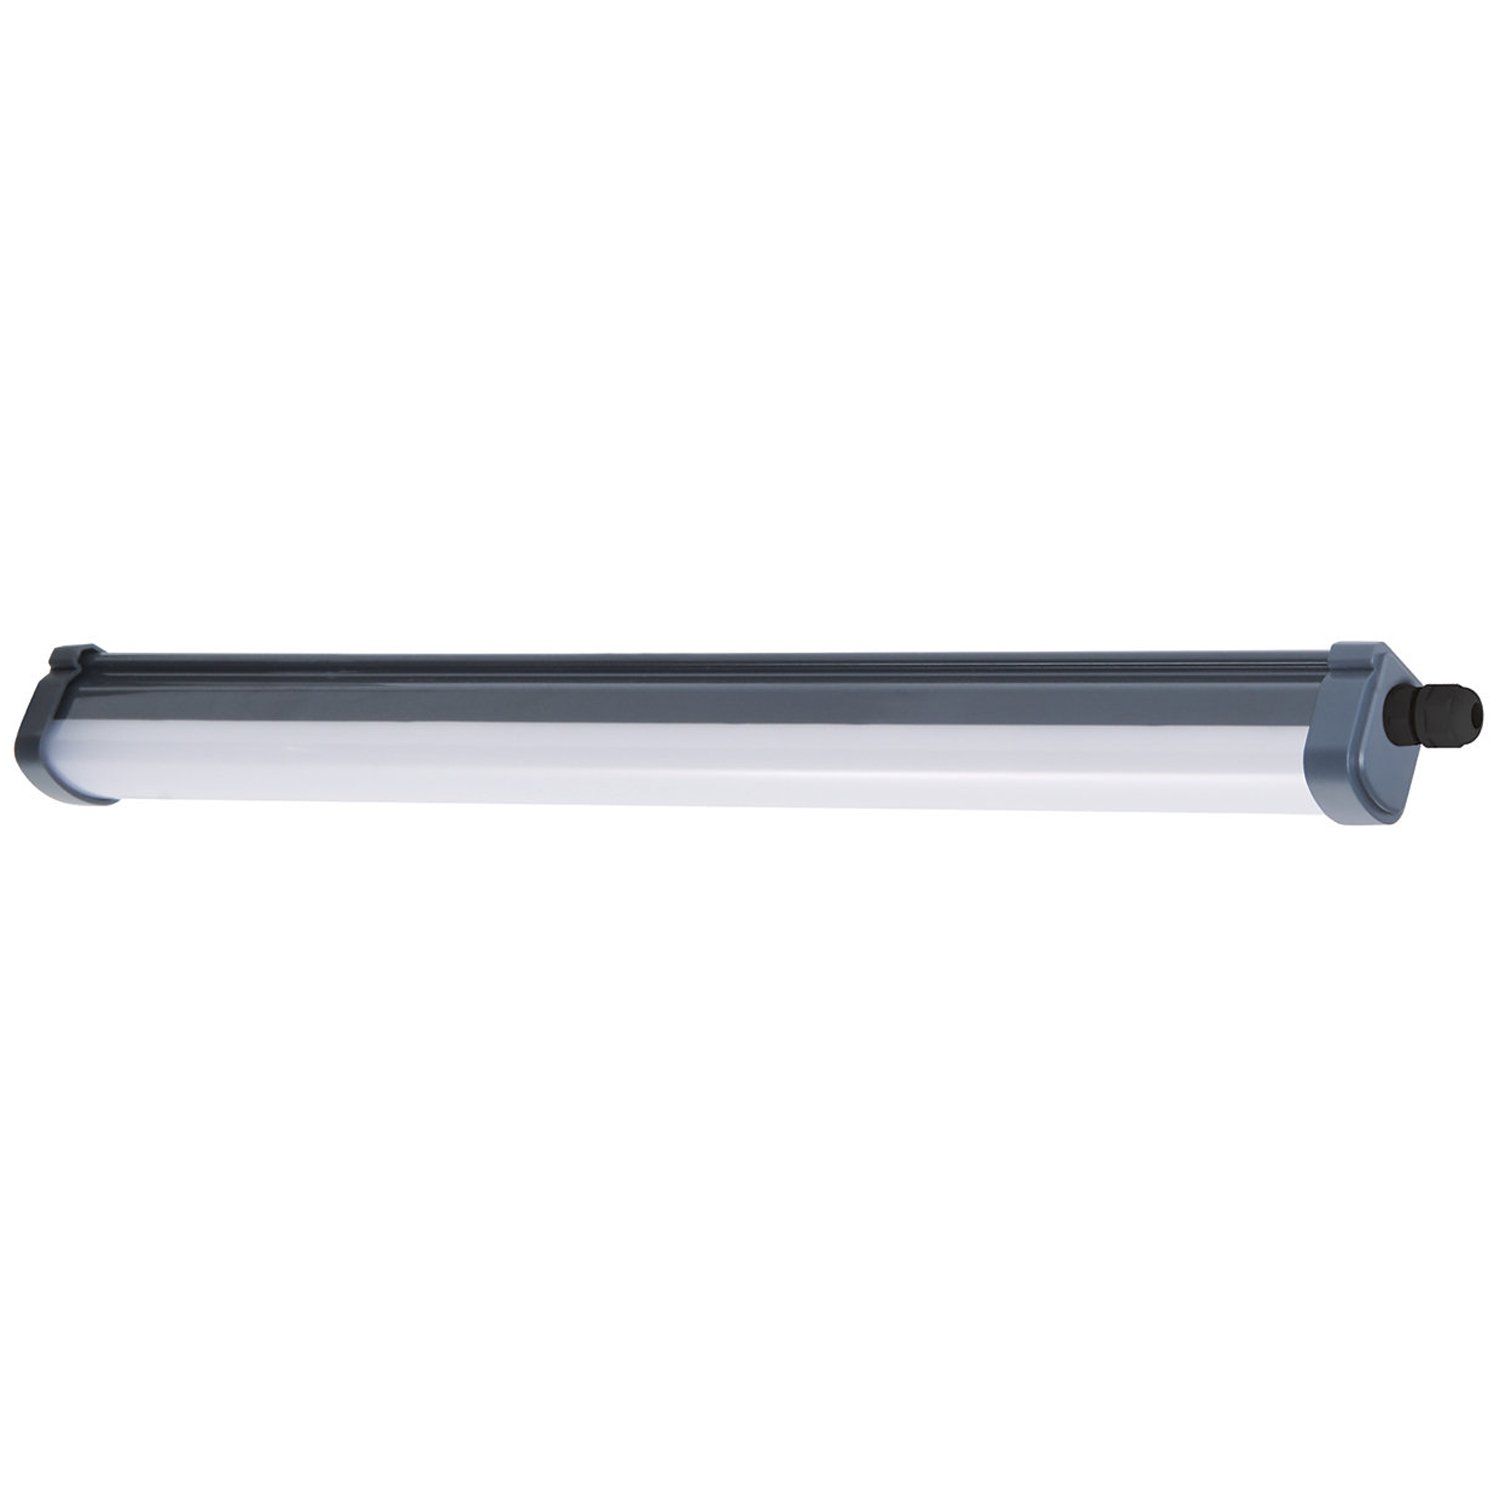 Philips ProjectLine Taklampa 60cm 17W 1700lm IP65